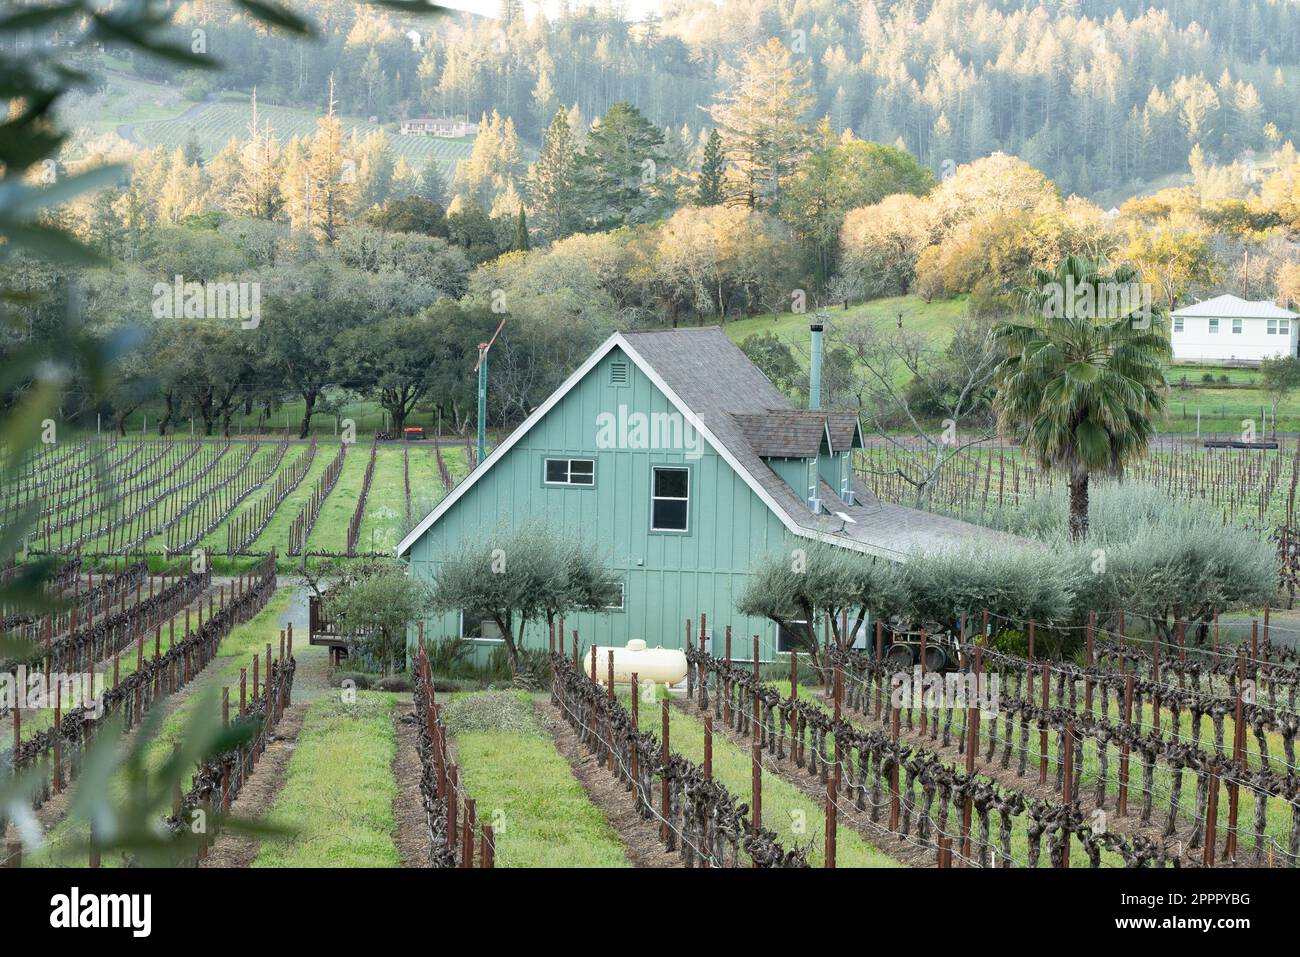 Peaceful Napa Valley California scene with vineyards in view Stock Photo